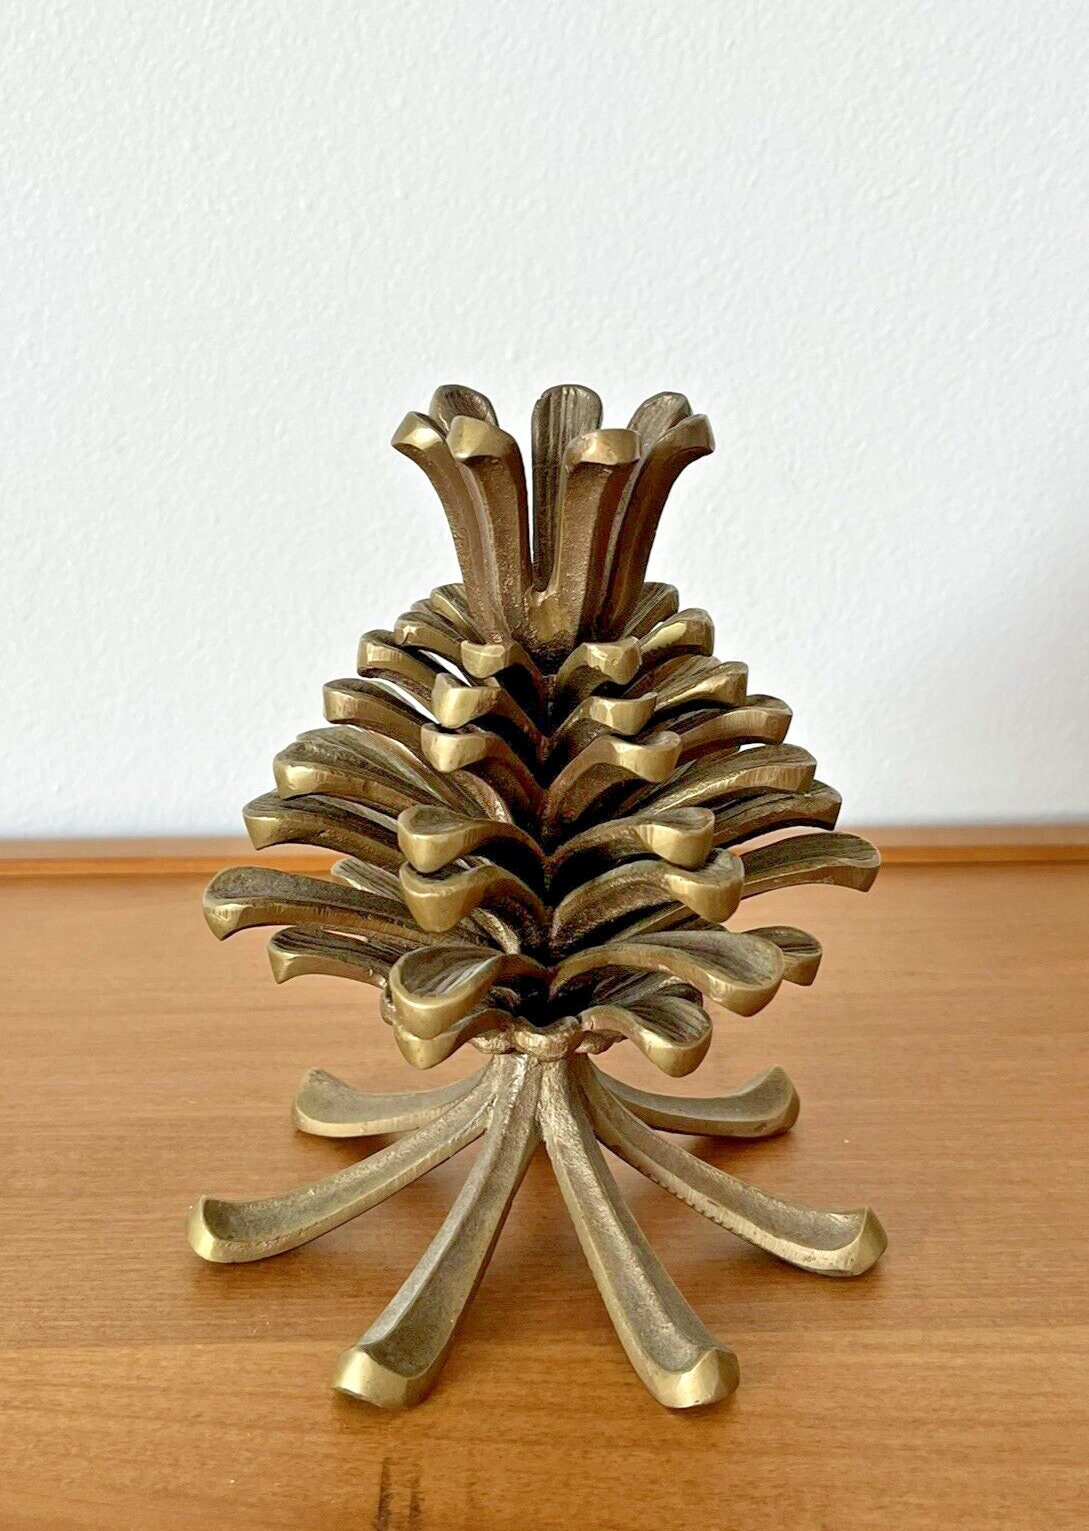 RARE Vintage Solid Brass Pinecone Candle Holders Chrsitmas Tree